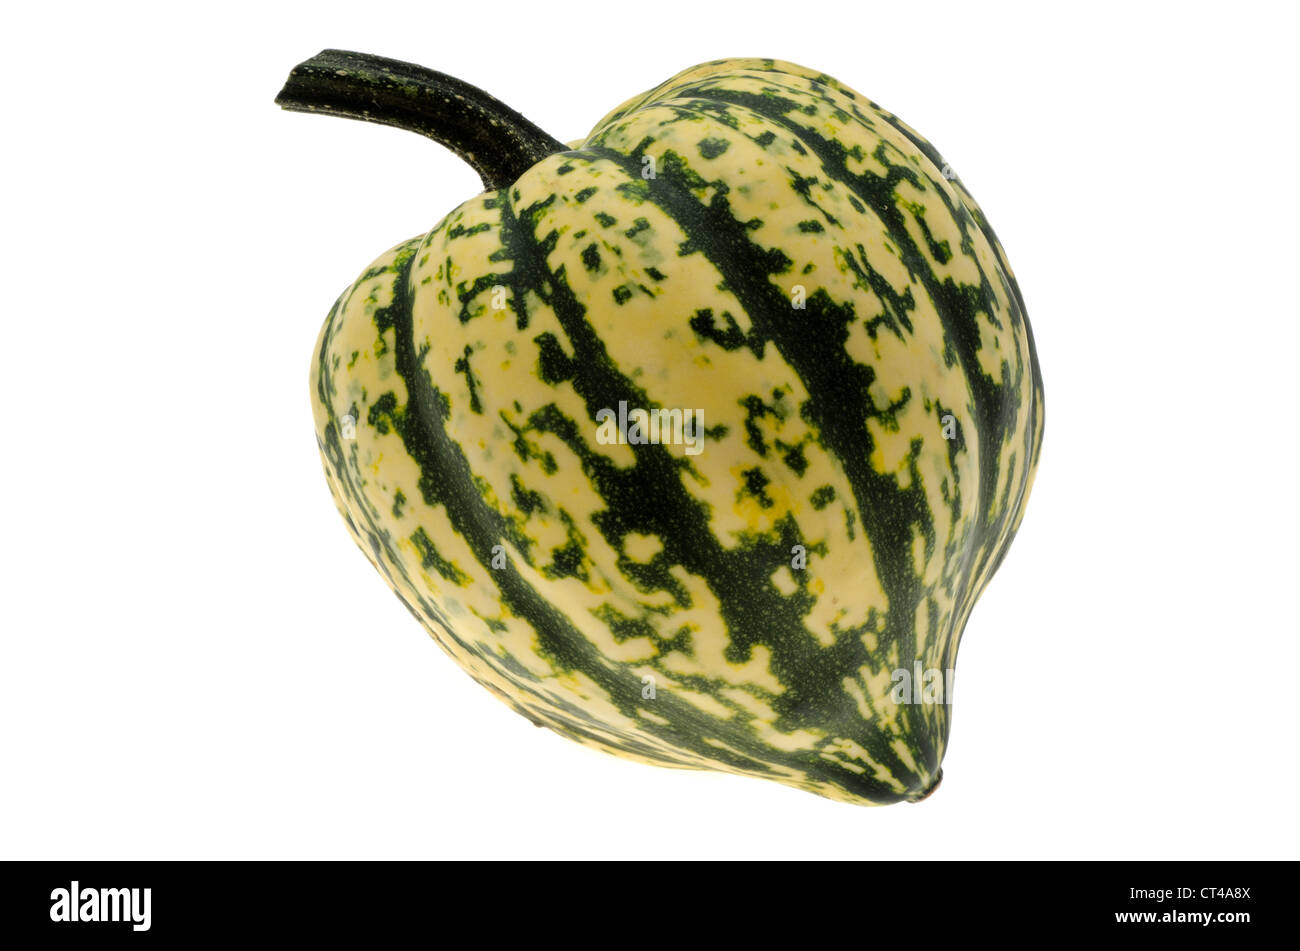 Green gourd - studio shot with a white background Stock Photo